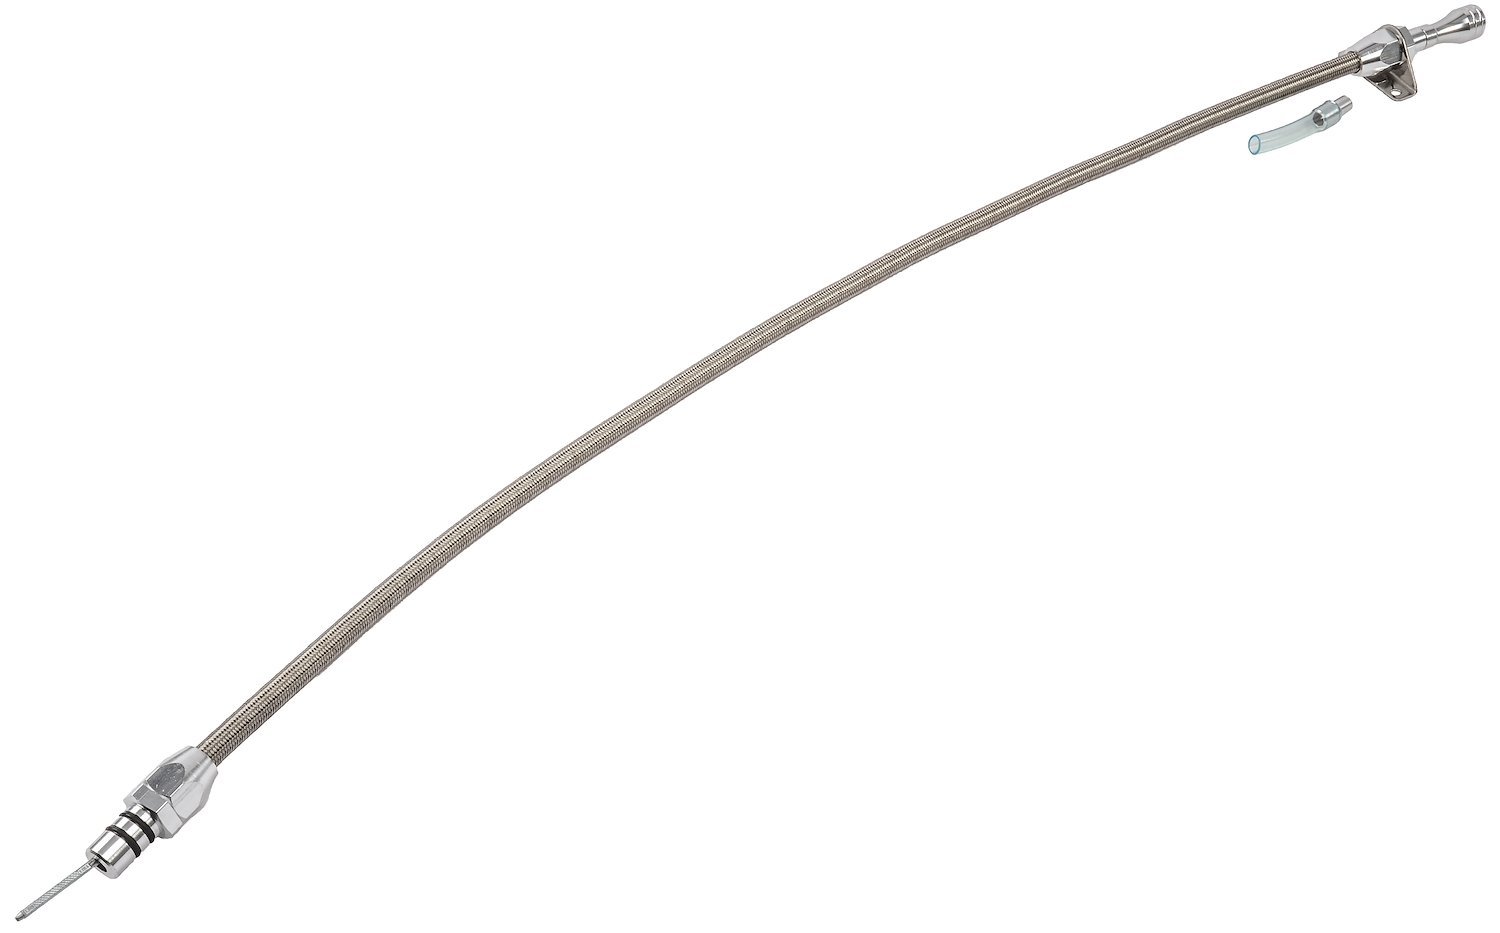 Flexible Braided Transmission Dipstick for Ford AOD [Polished]